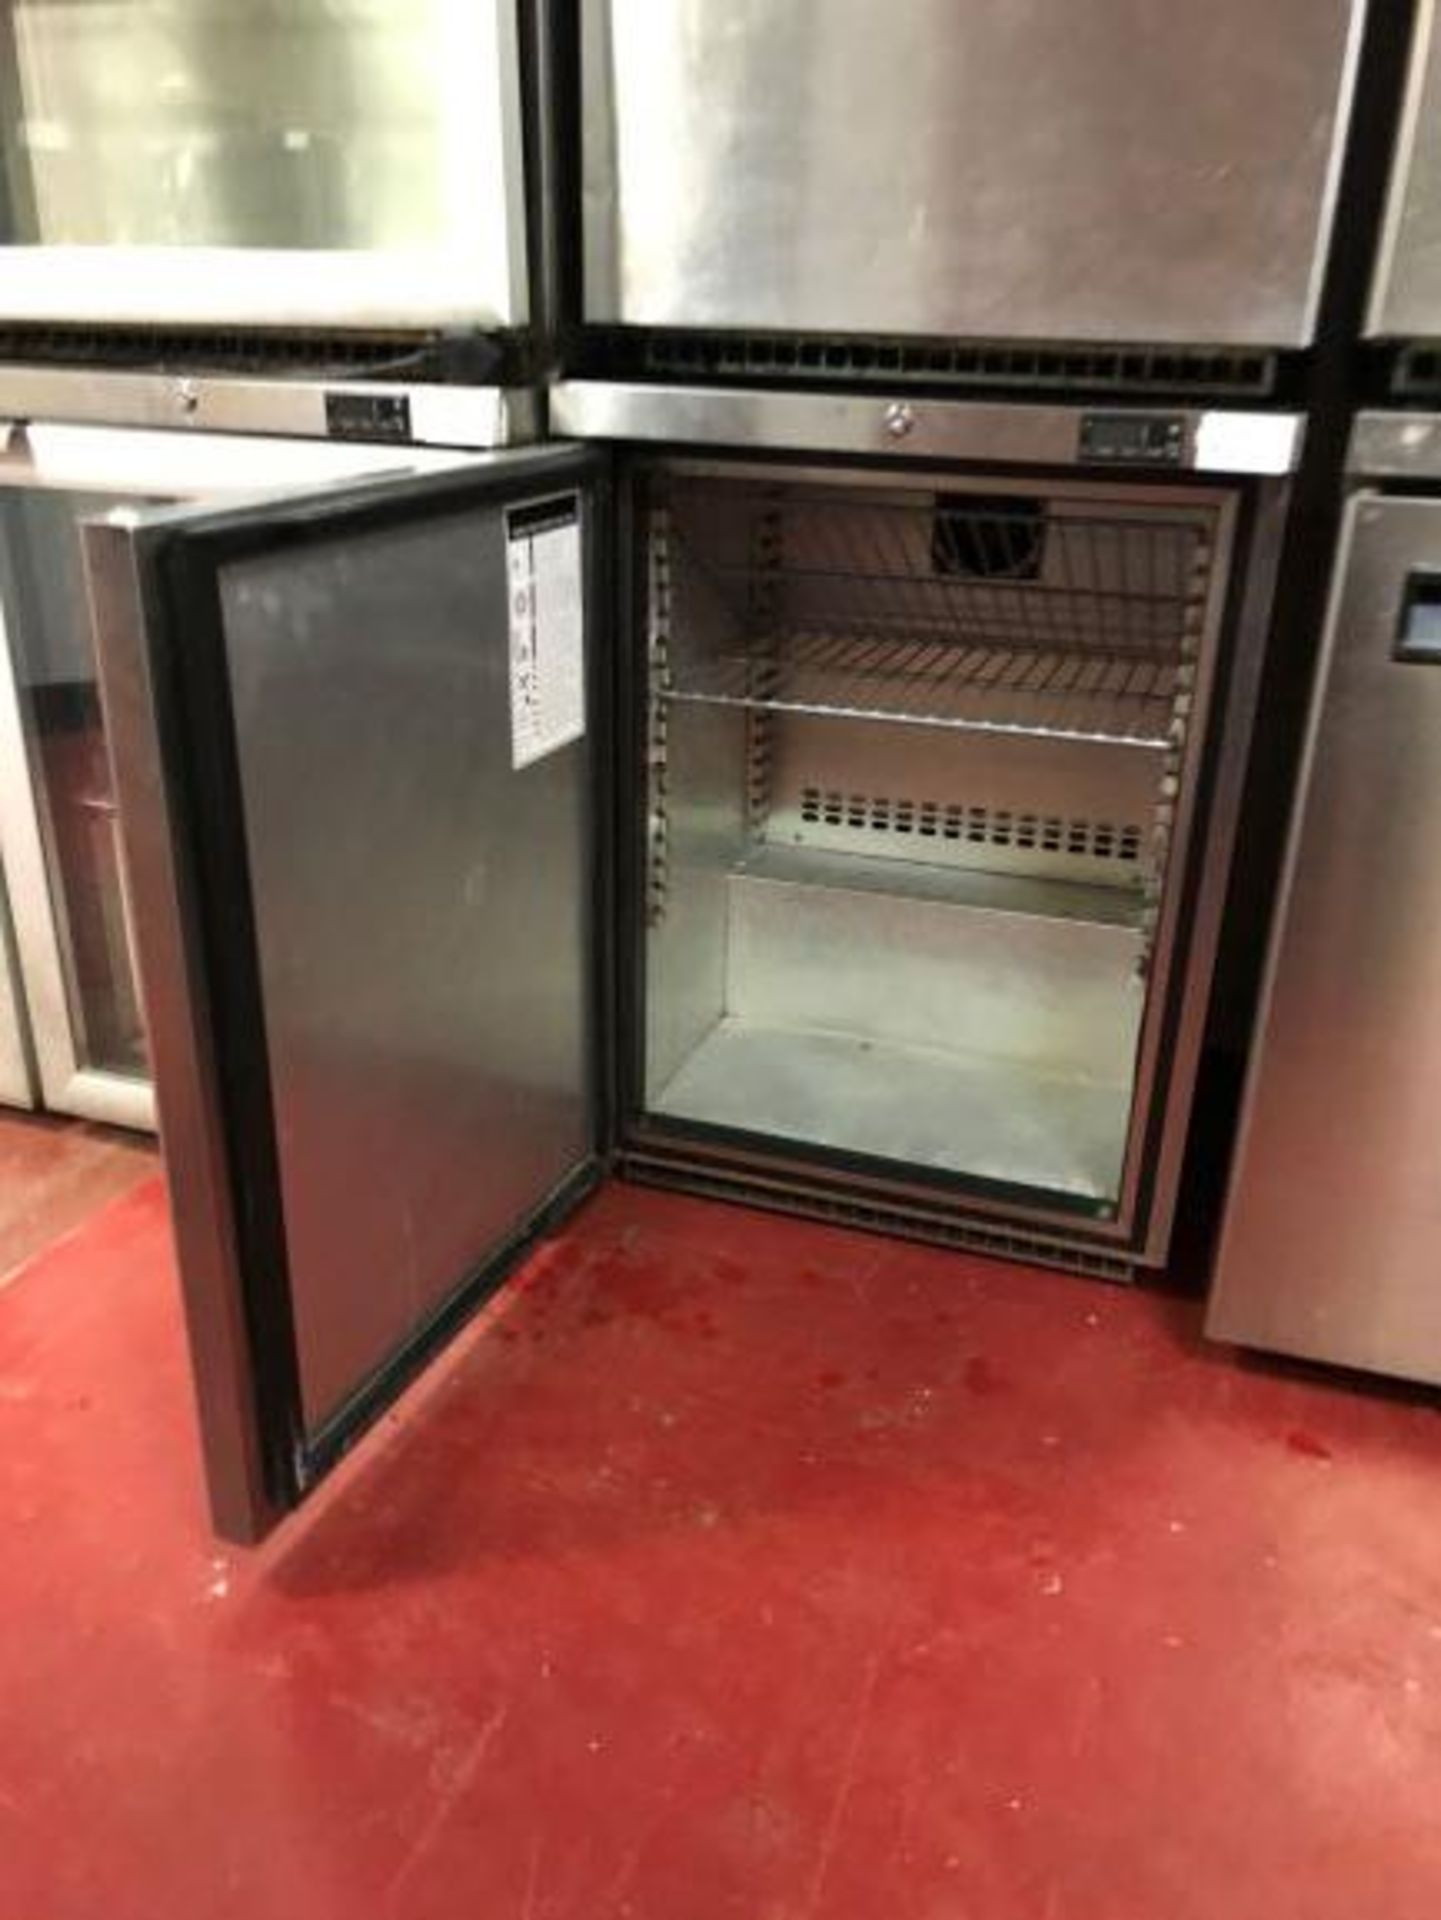 Foster Refrigeration HR150-A stainless steel single door under counter refrigerator - Image 2 of 3